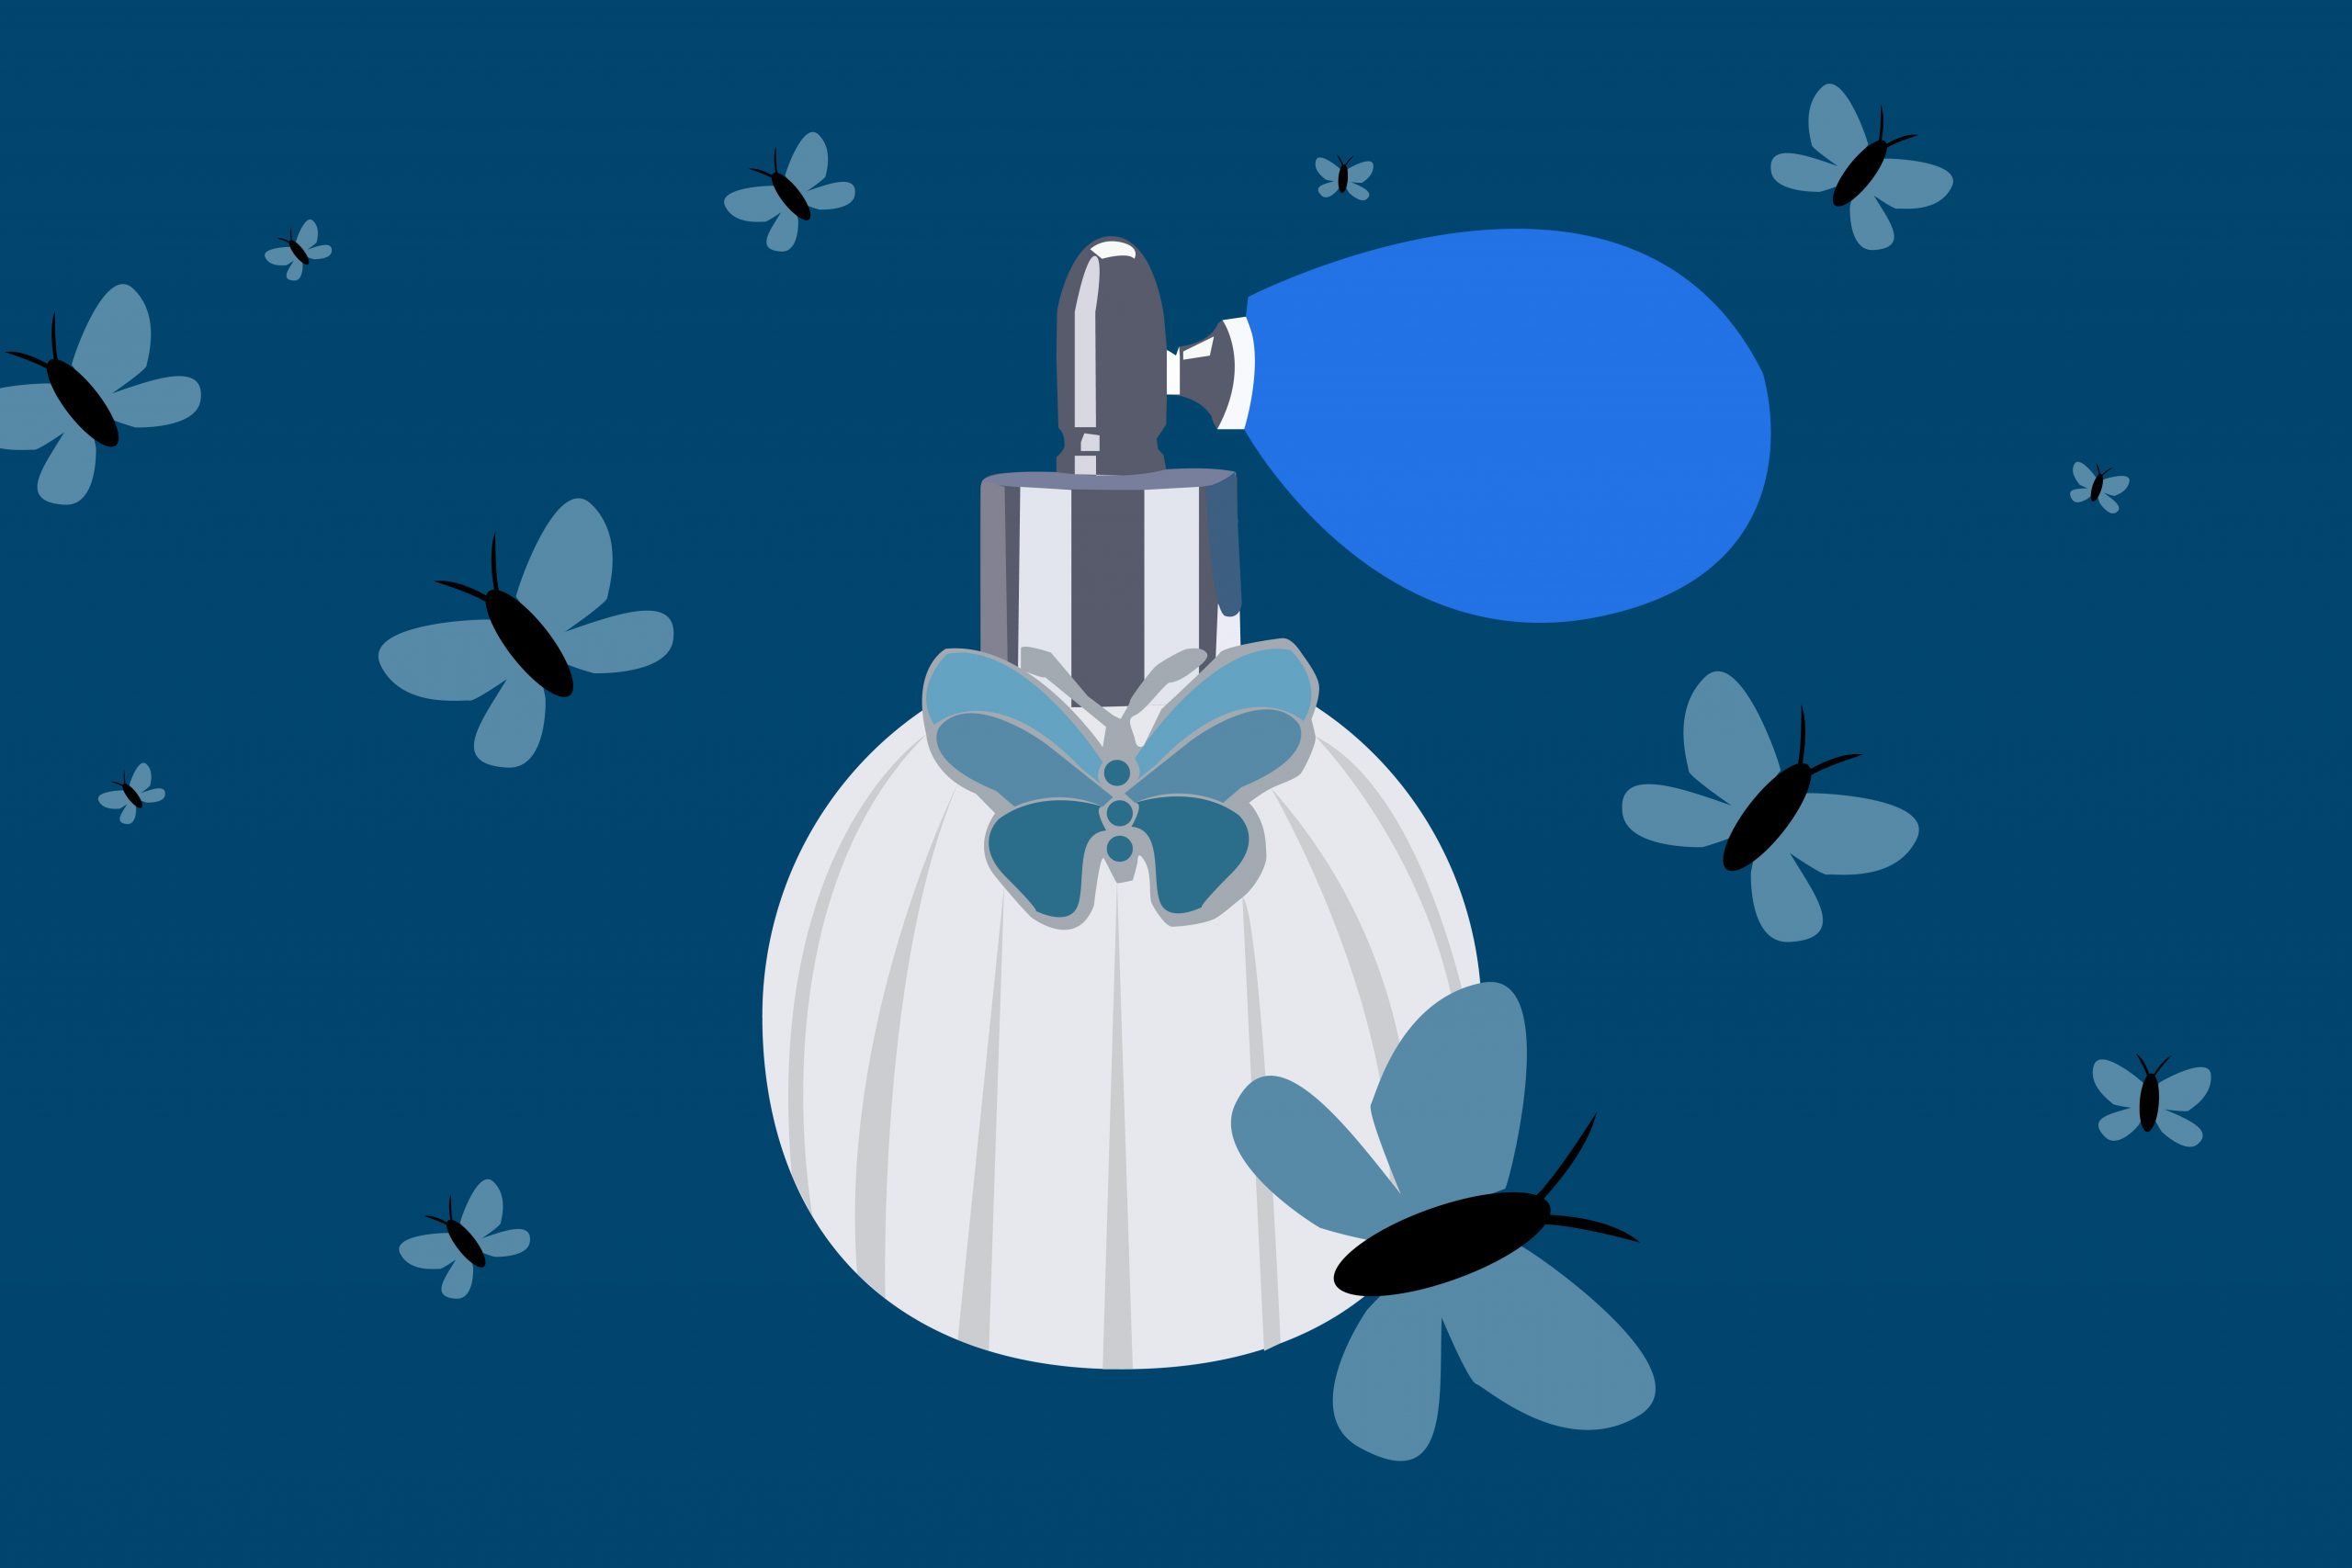 in an article about perfume commercials, an illustration of perfume bottle surrounded by butterflies